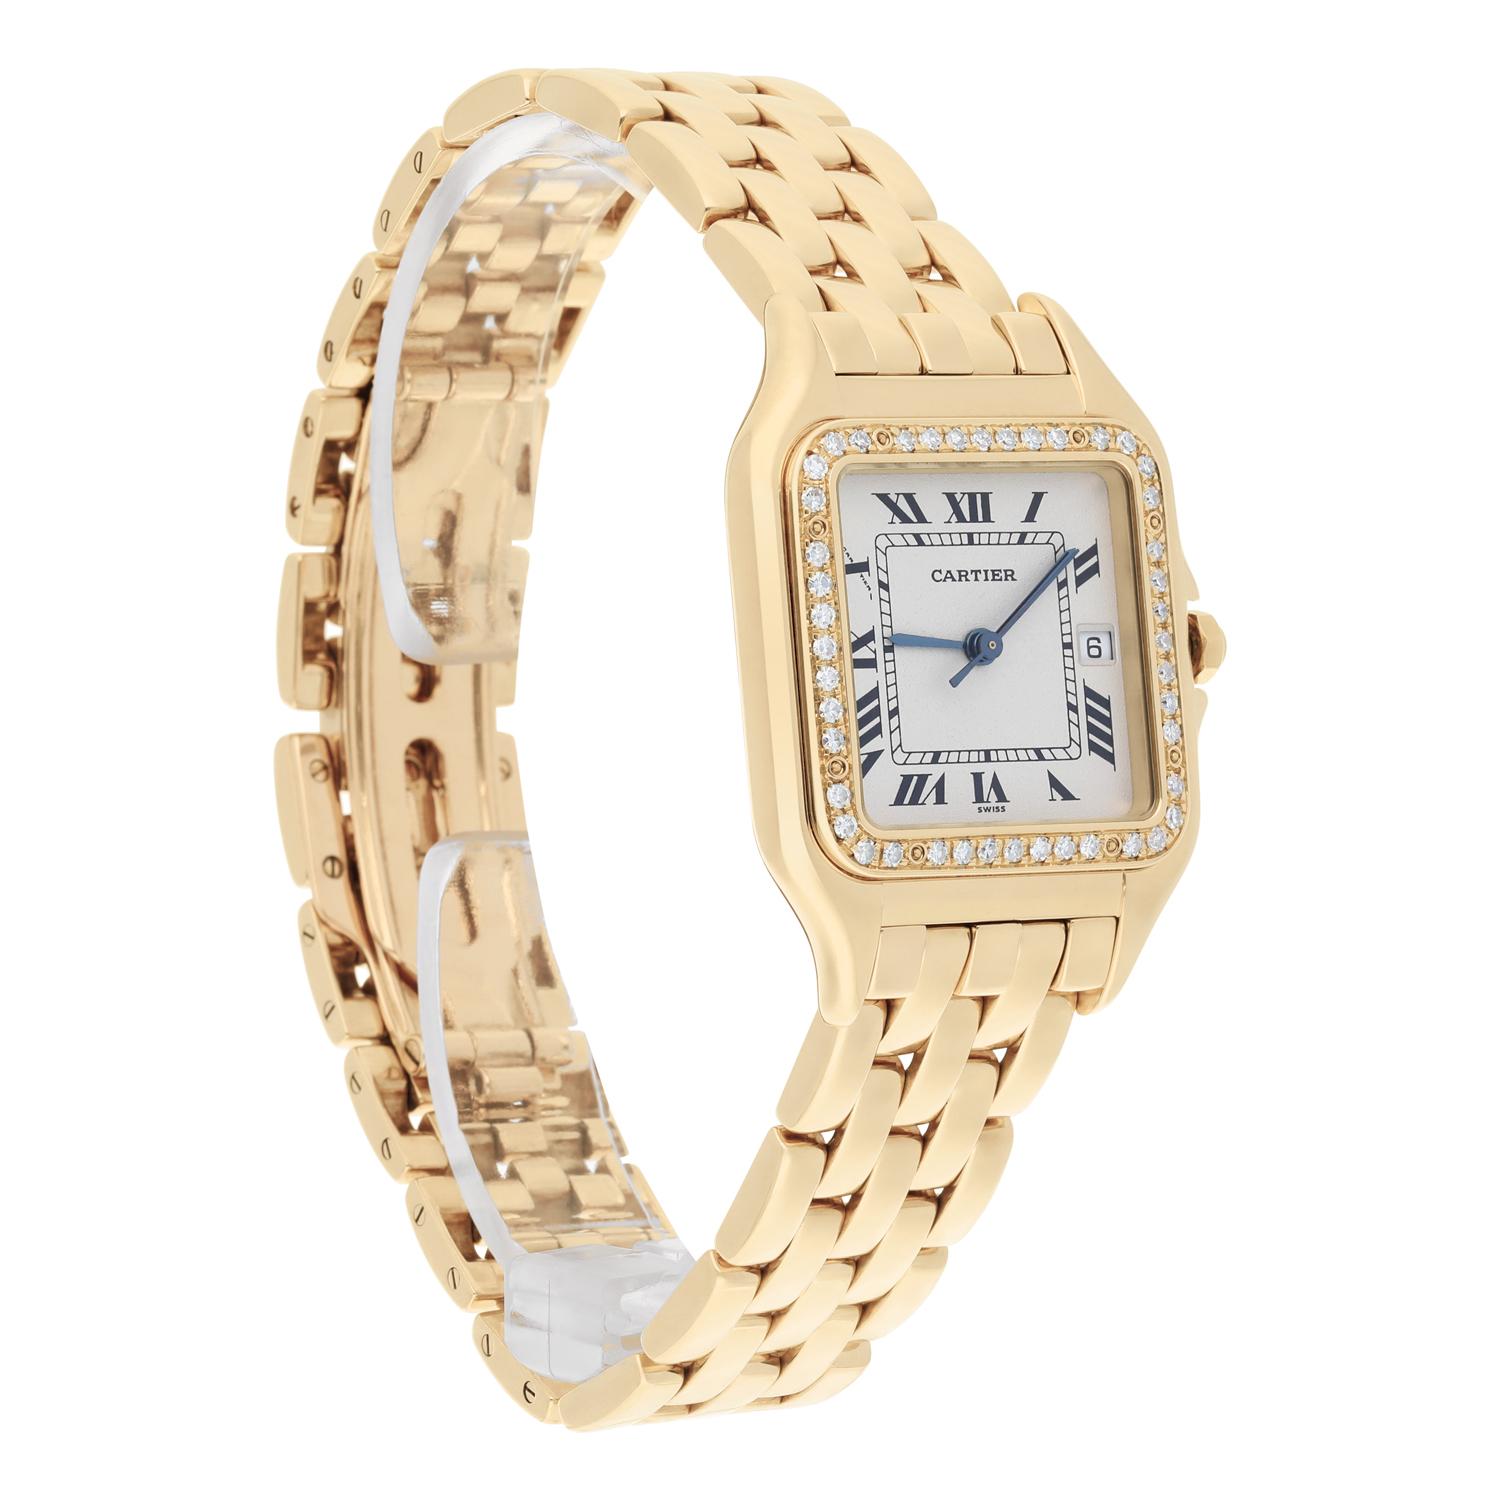 Cartier Panthere 29mm Ladies Large 18K Yellow Gold Watch with Diamonds 887968 1